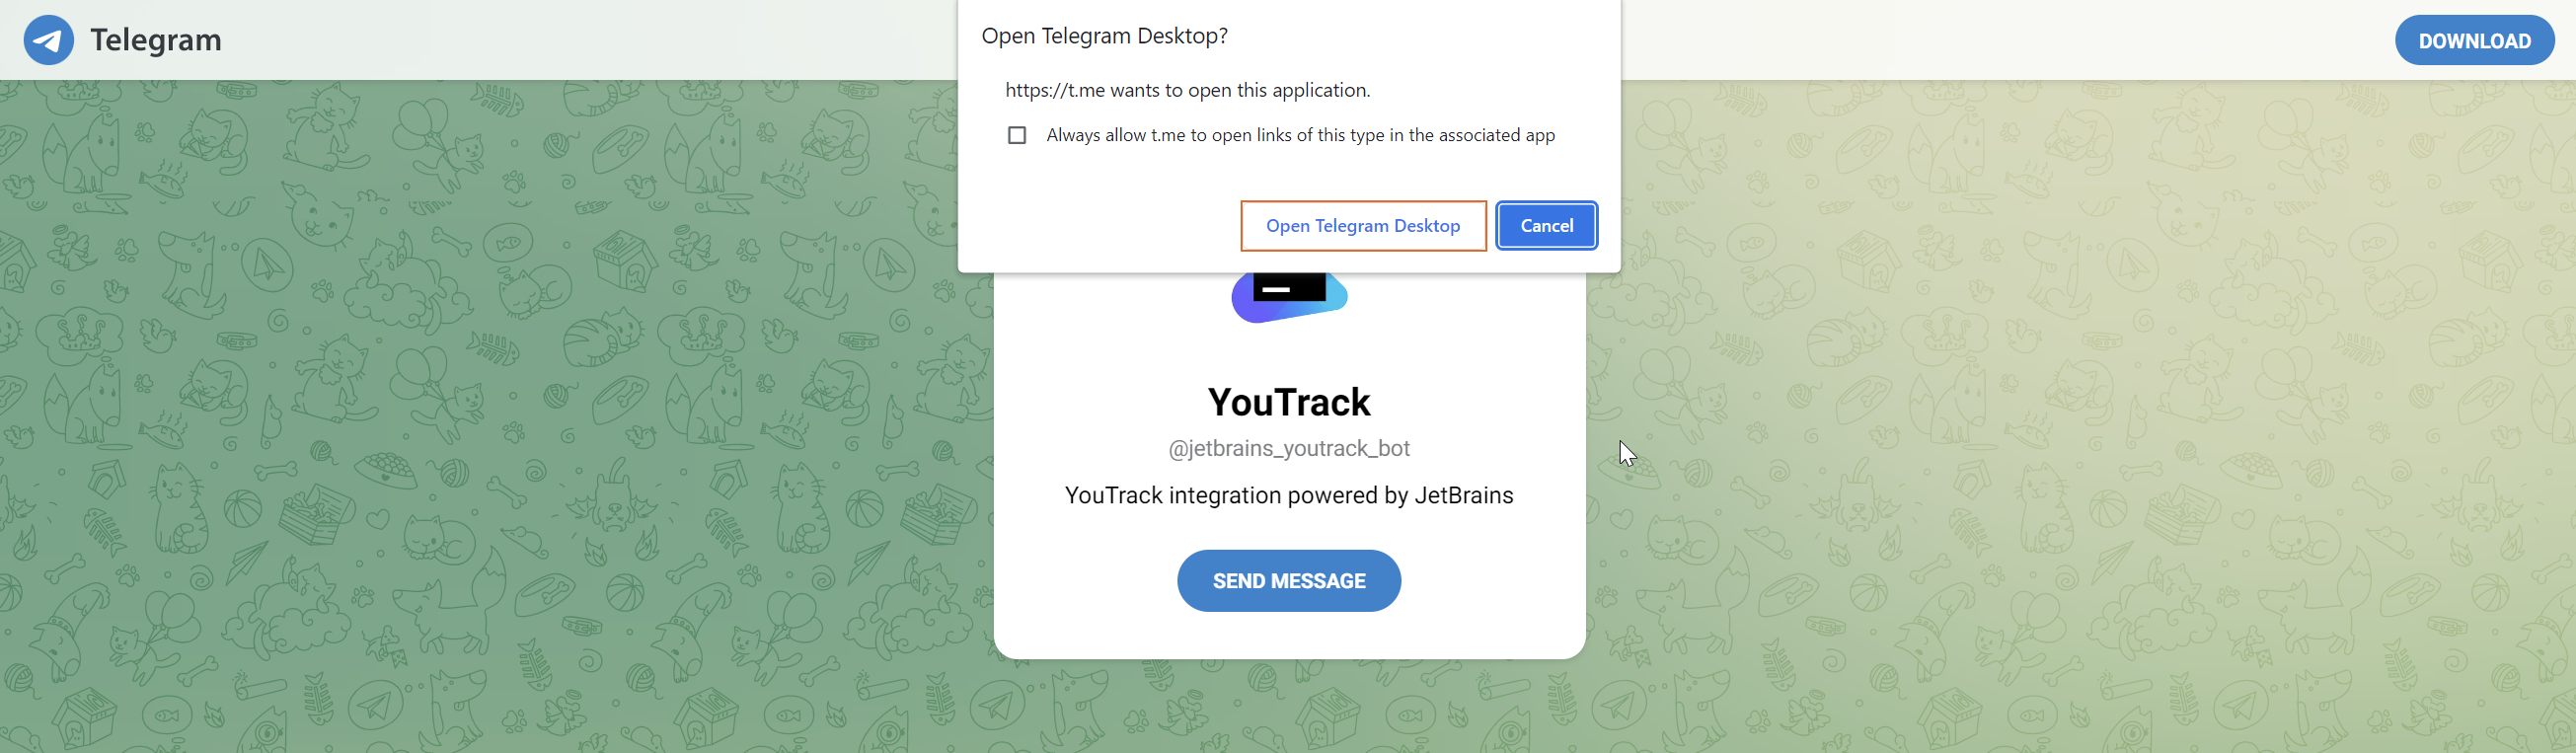 Option to connect with a Telegram account in the notification settings for a YouTrack account.